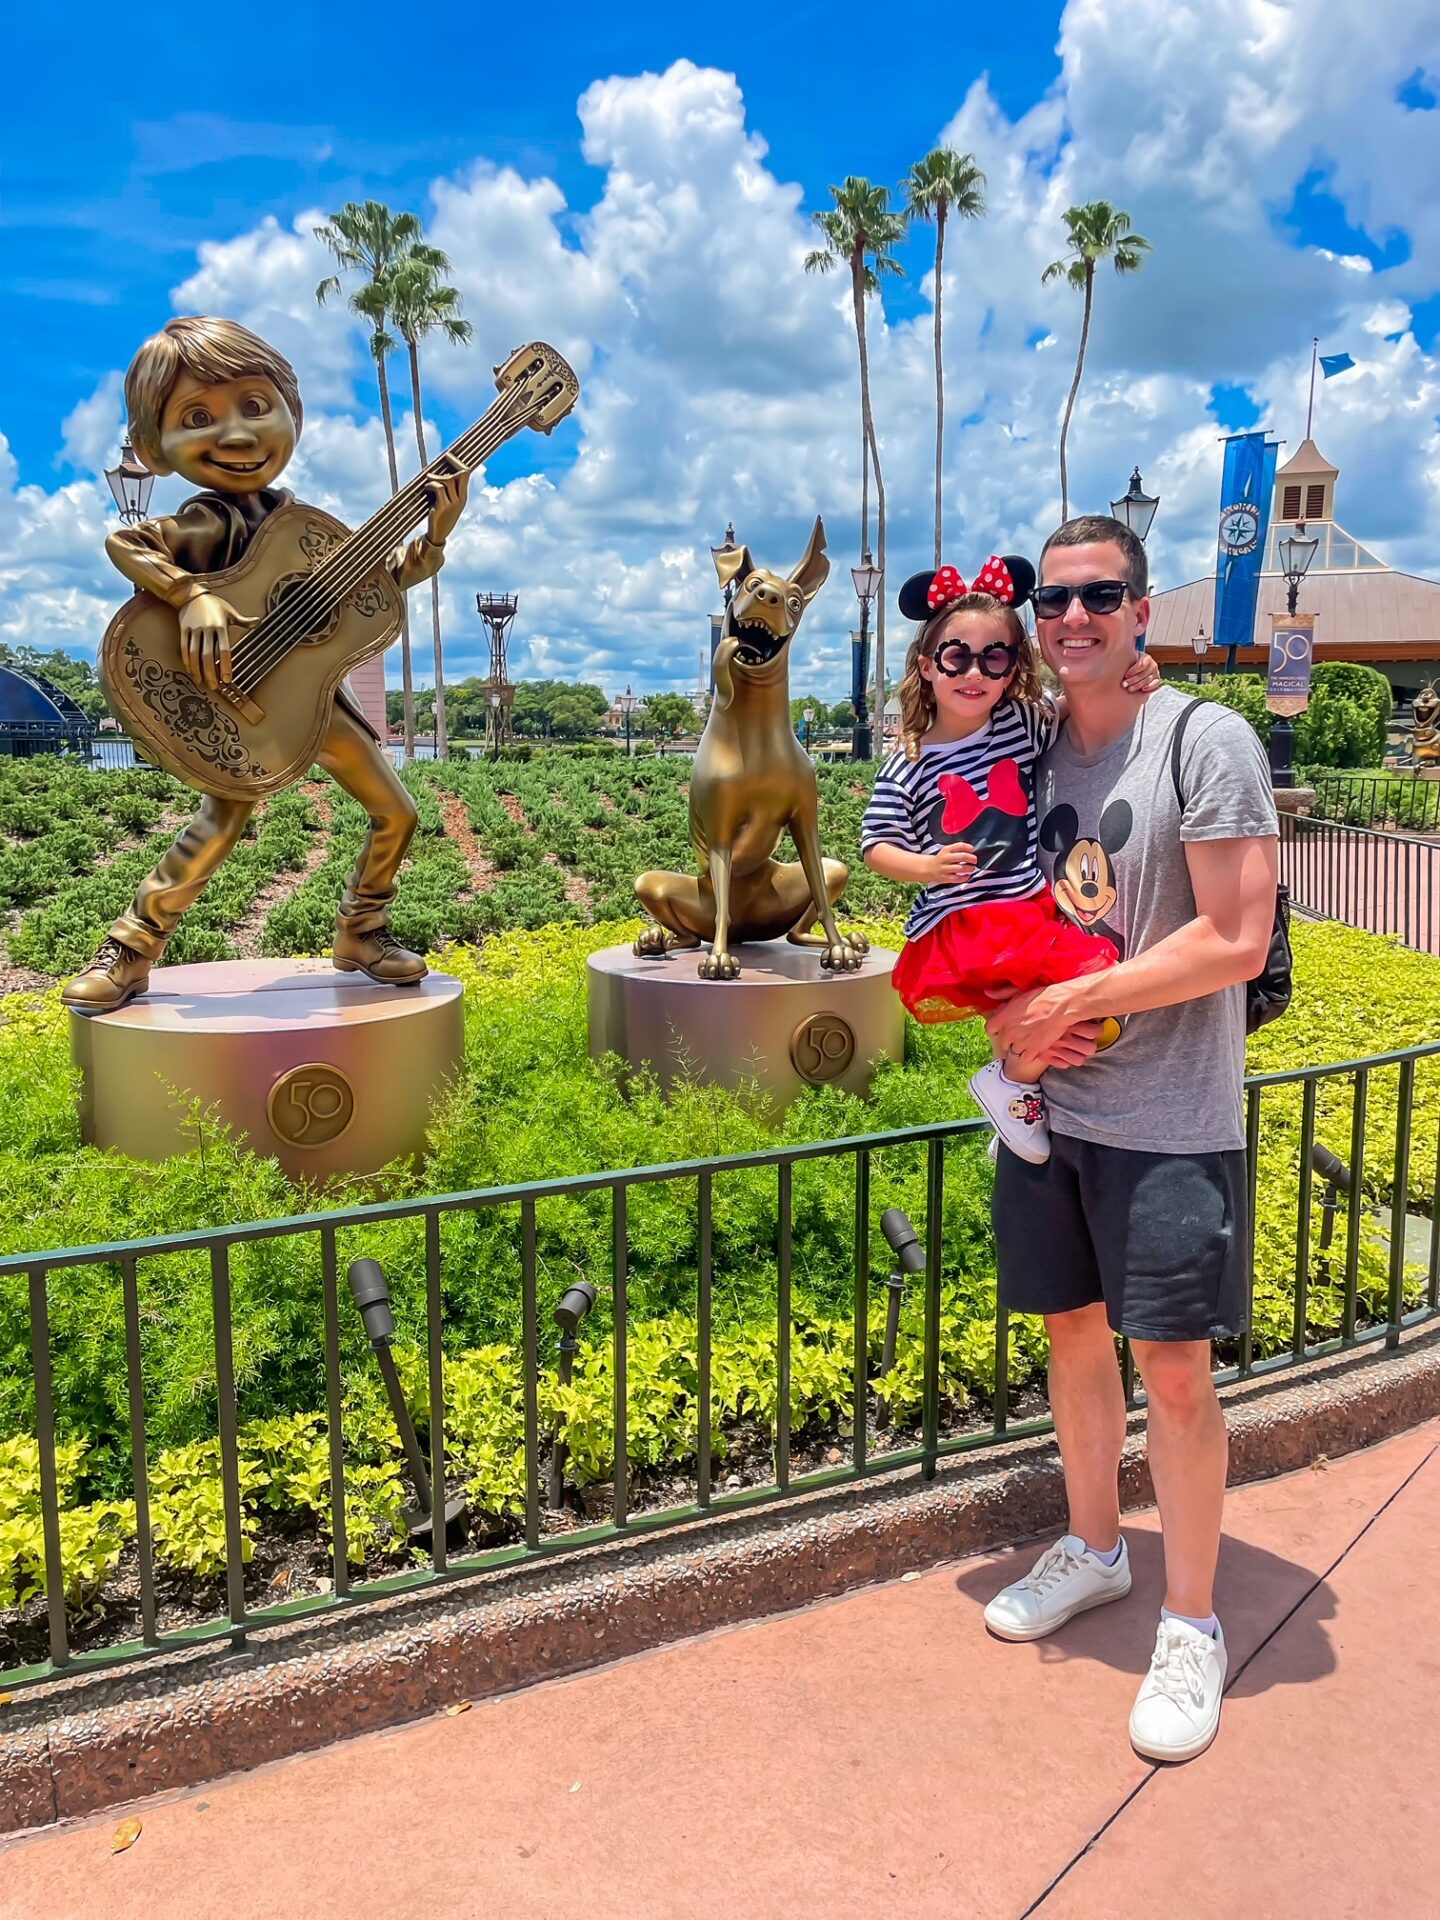 One day at Disney - our EPCOT itinerary with Genie+ tips